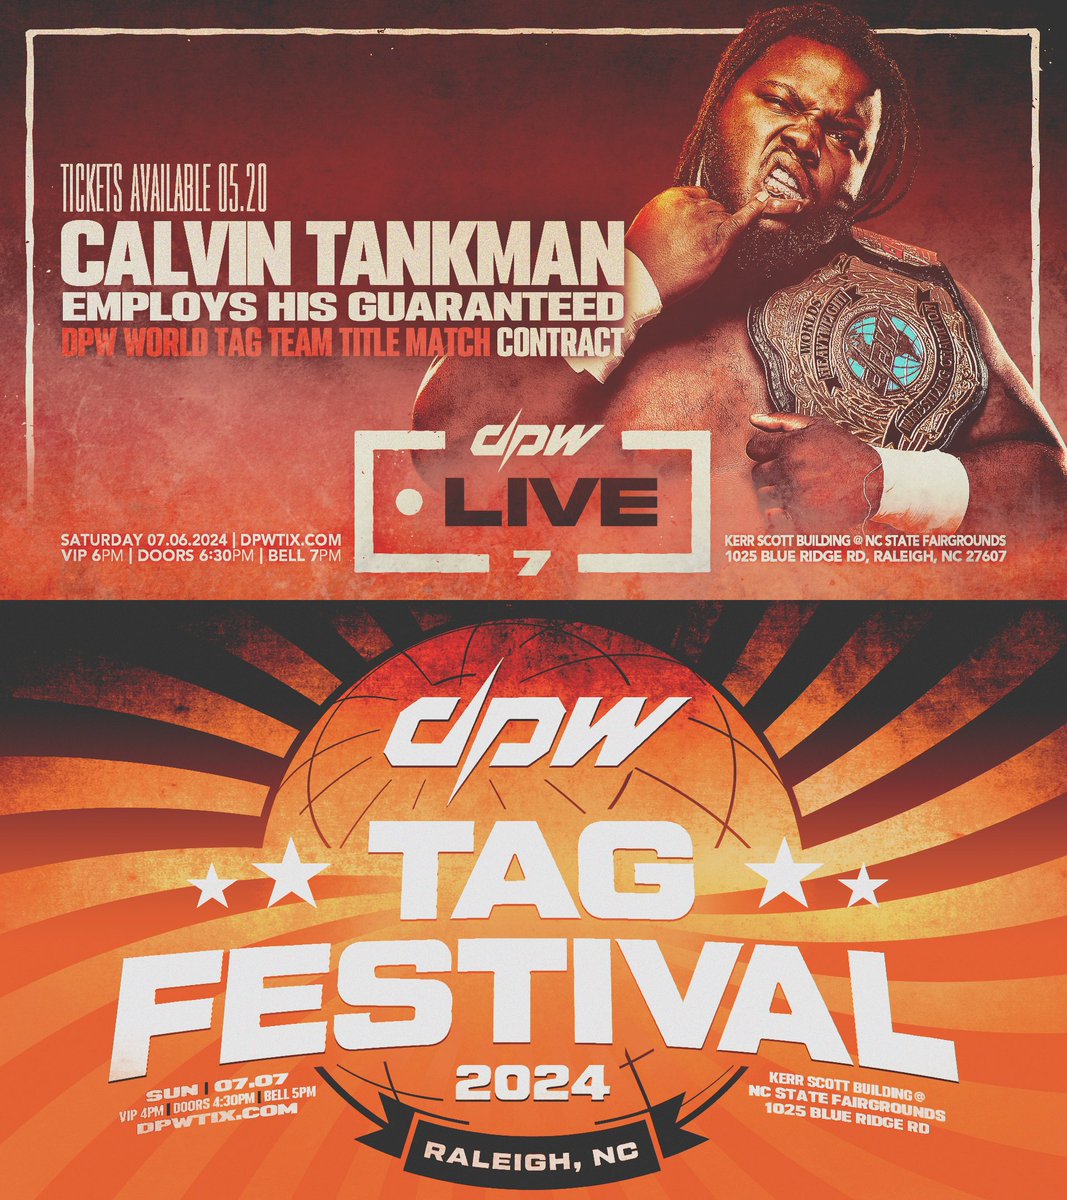 🗣 NEW DPW SHOW ANNOUNCEMENT ℹ️ DPW LIVE 7 / DPW Tag Festival 📆 July 6 & 7, 2024 | Raleigh, NC 🎟 TIX ON SALE 05/20/24 A double shot weekend - Calvin Tankman challenges for the DPW Tag Team Championship on Sat; The second annual Tag Festival tournament will be held on Sun!